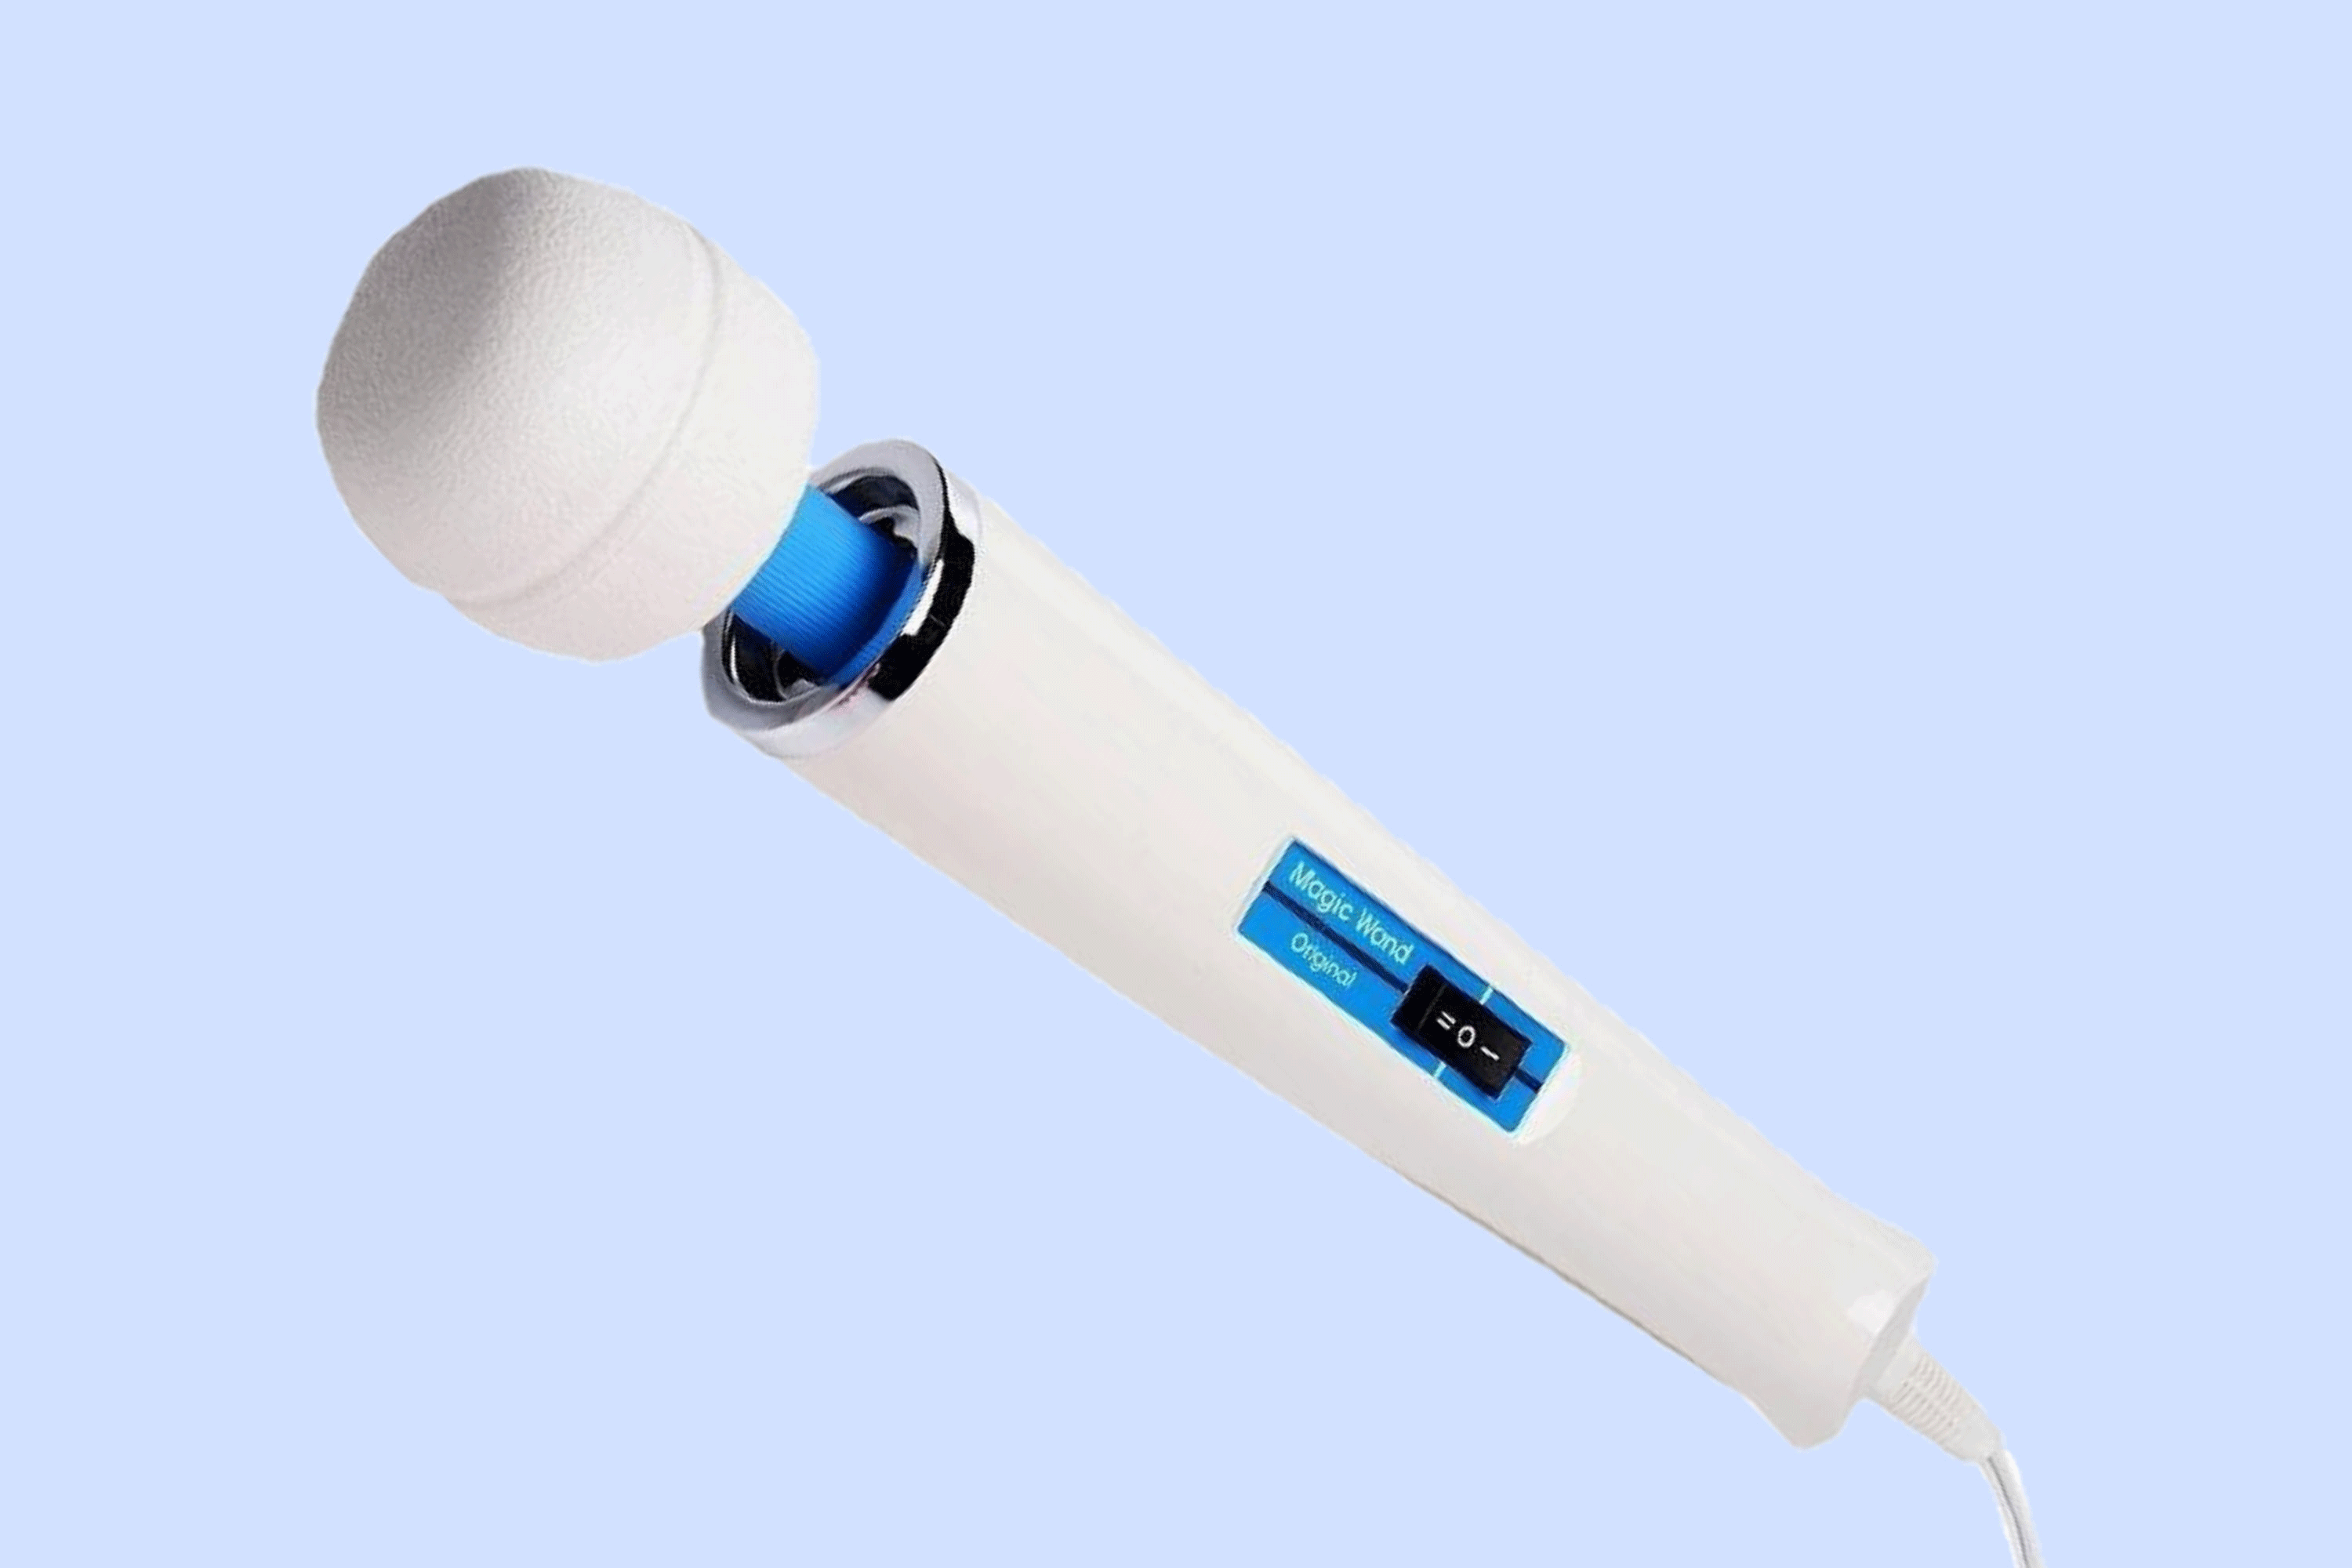 Testing drive magic wand attachment very